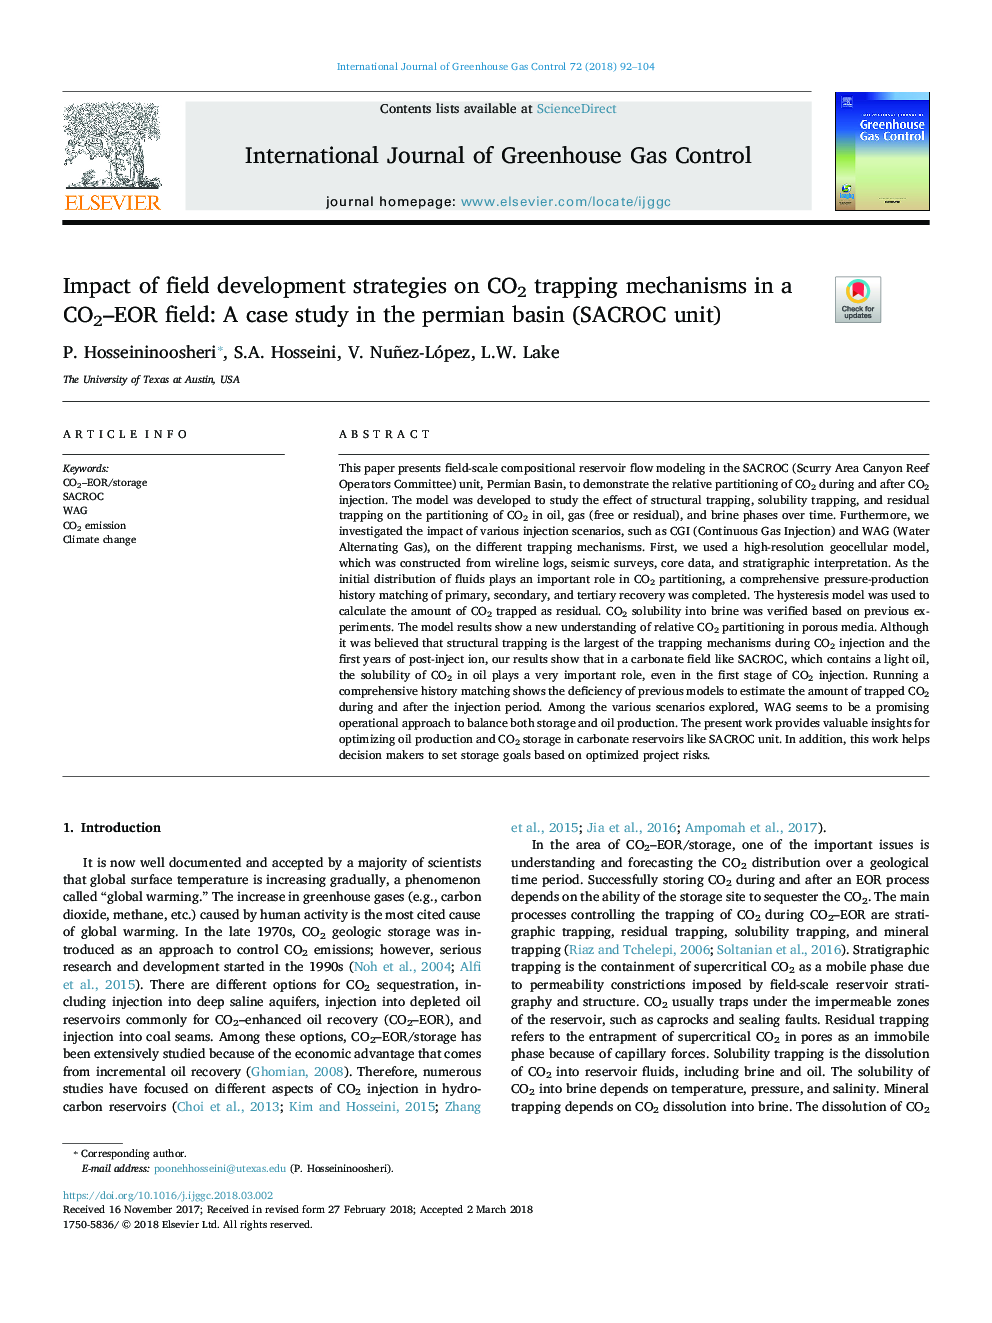 Impact of field development strategies on CO2 trapping mechanisms in a CO2-EOR field: A case study in the permian basin (SACROC unit)